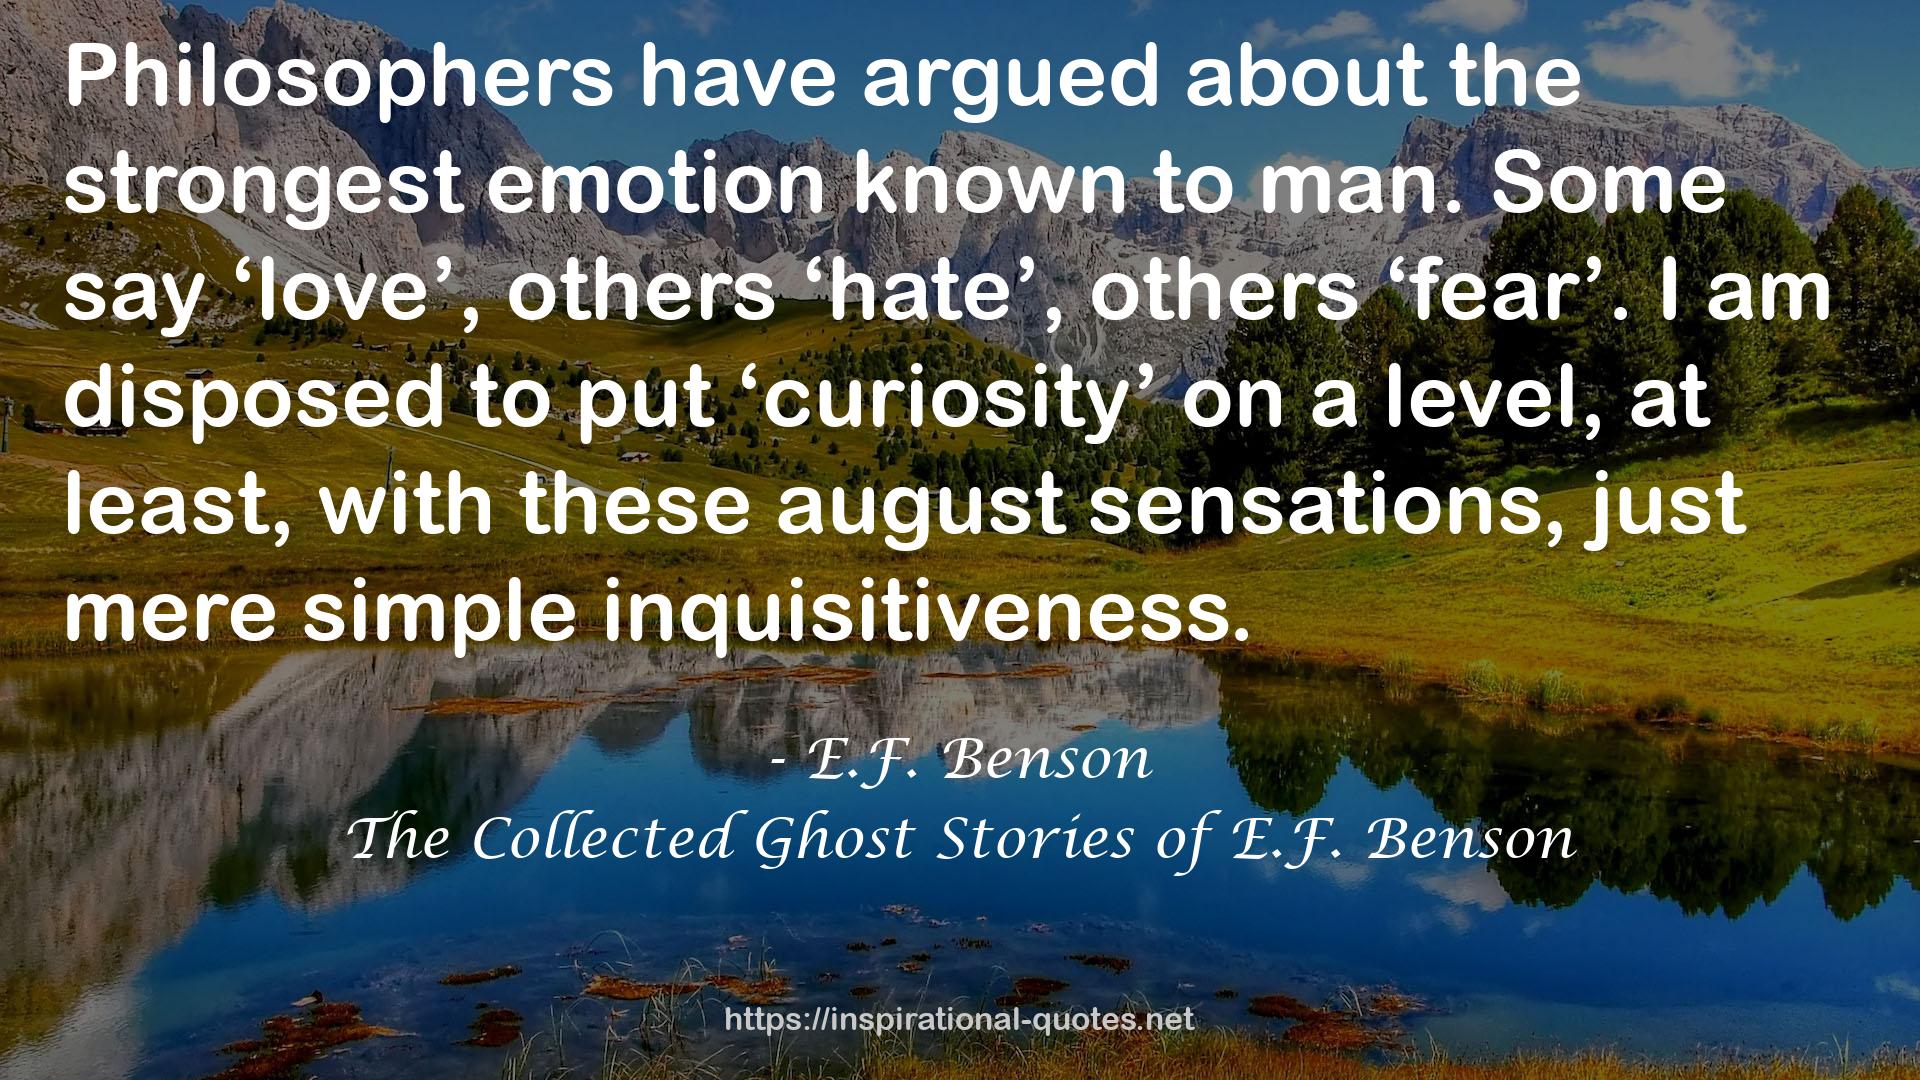 The Collected Ghost Stories of E.F. Benson QUOTES